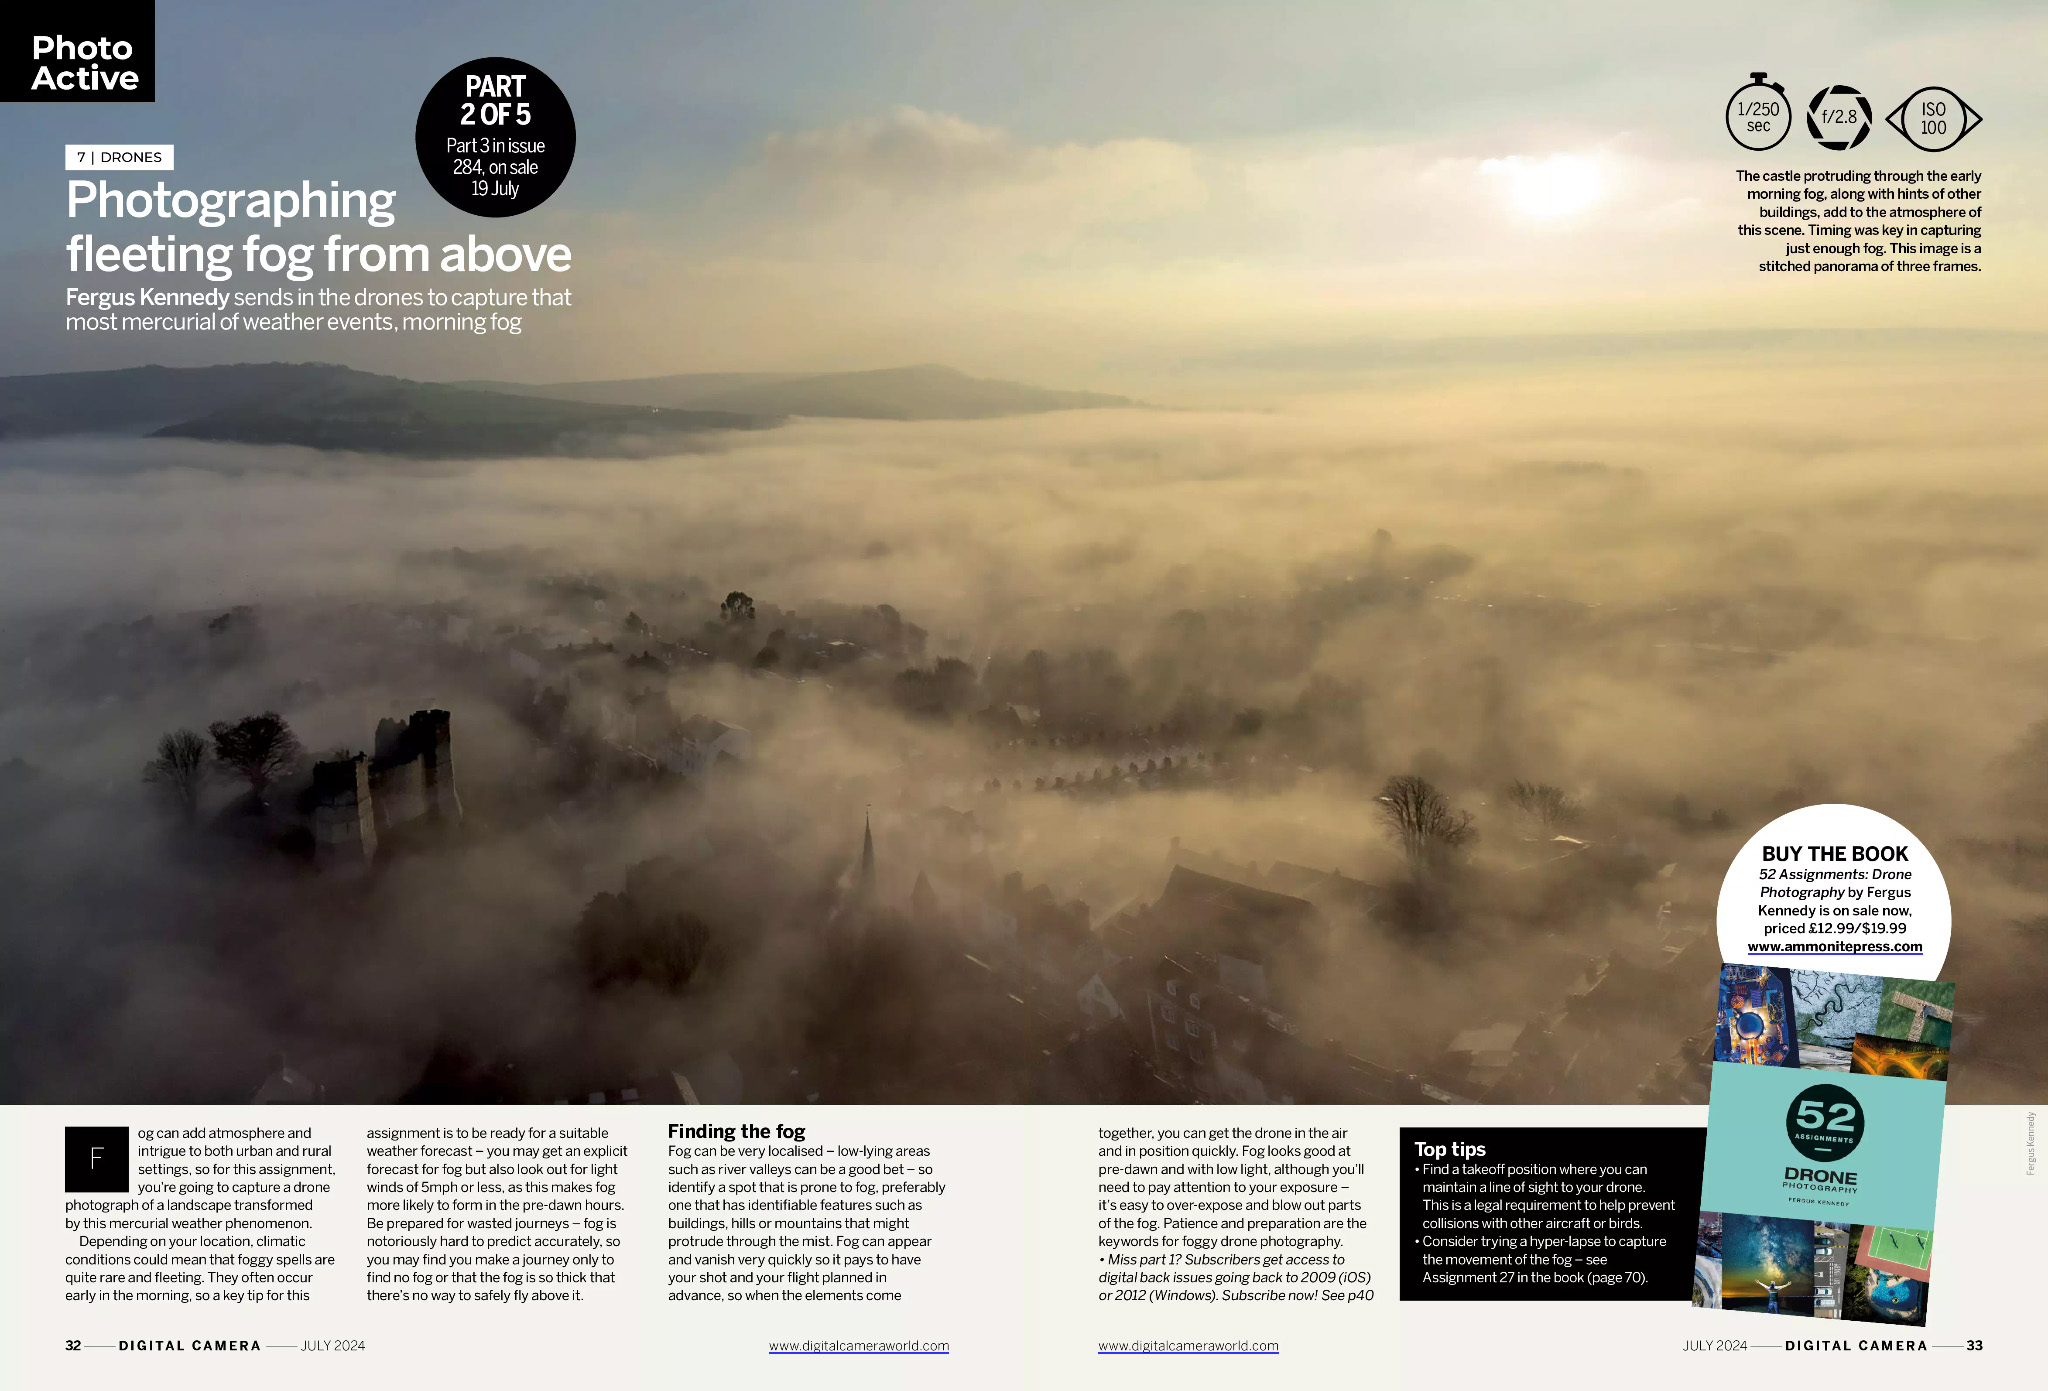 Photo project about photographing fog from above using a camera drone, in the July 2024 issue of Digital Camera magazine